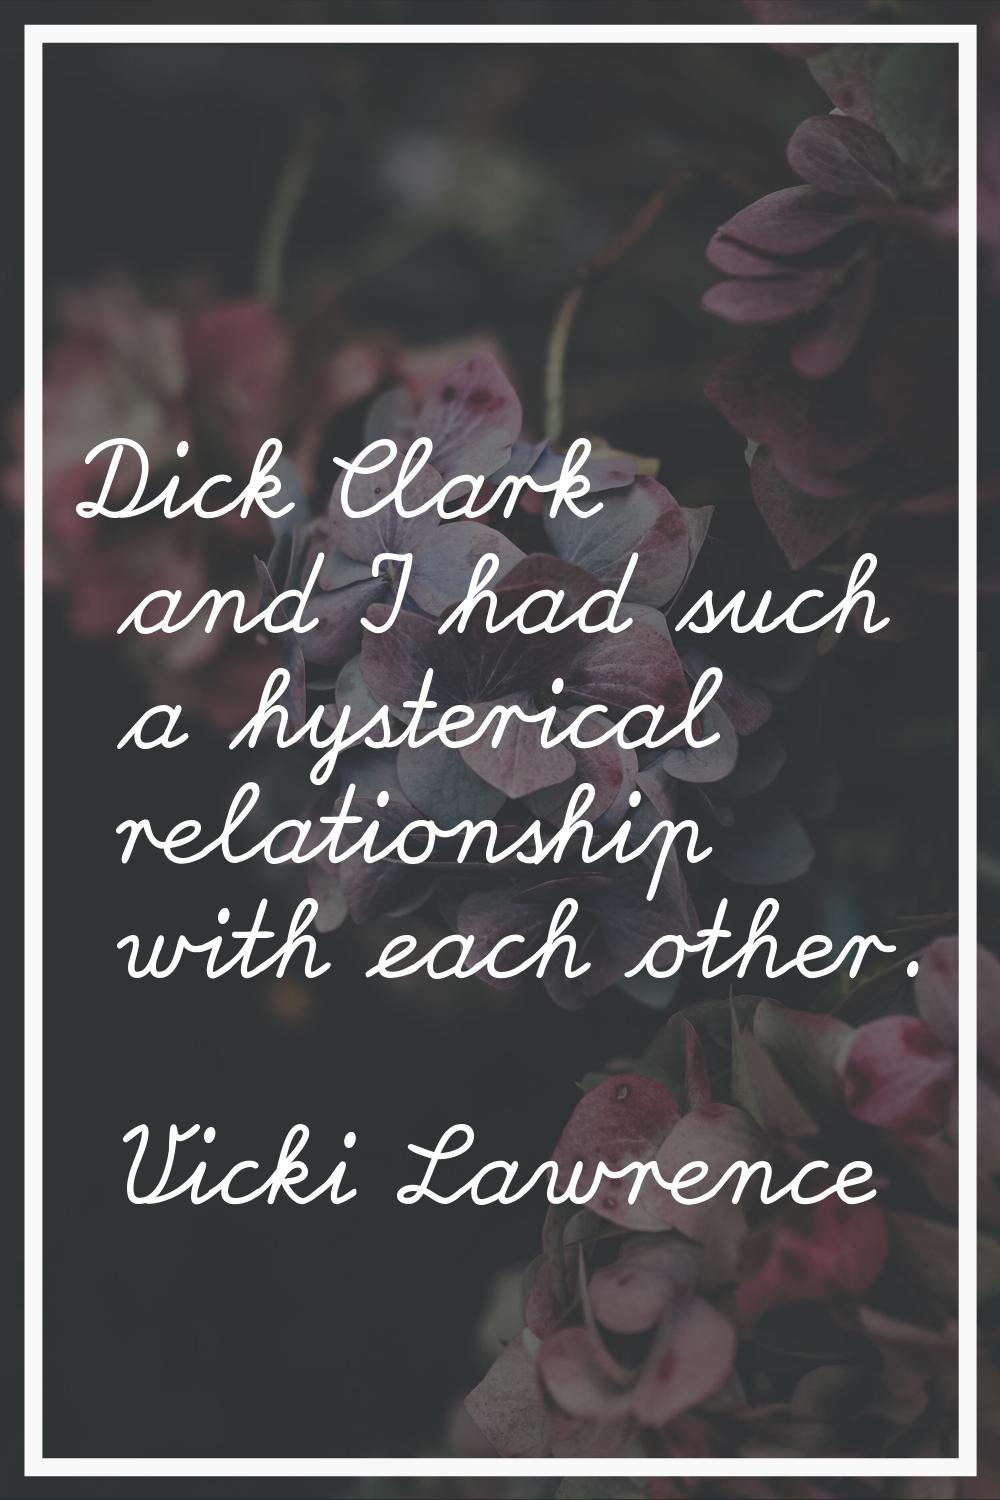 Dick Clark and I had such a hysterical relationship with each other.